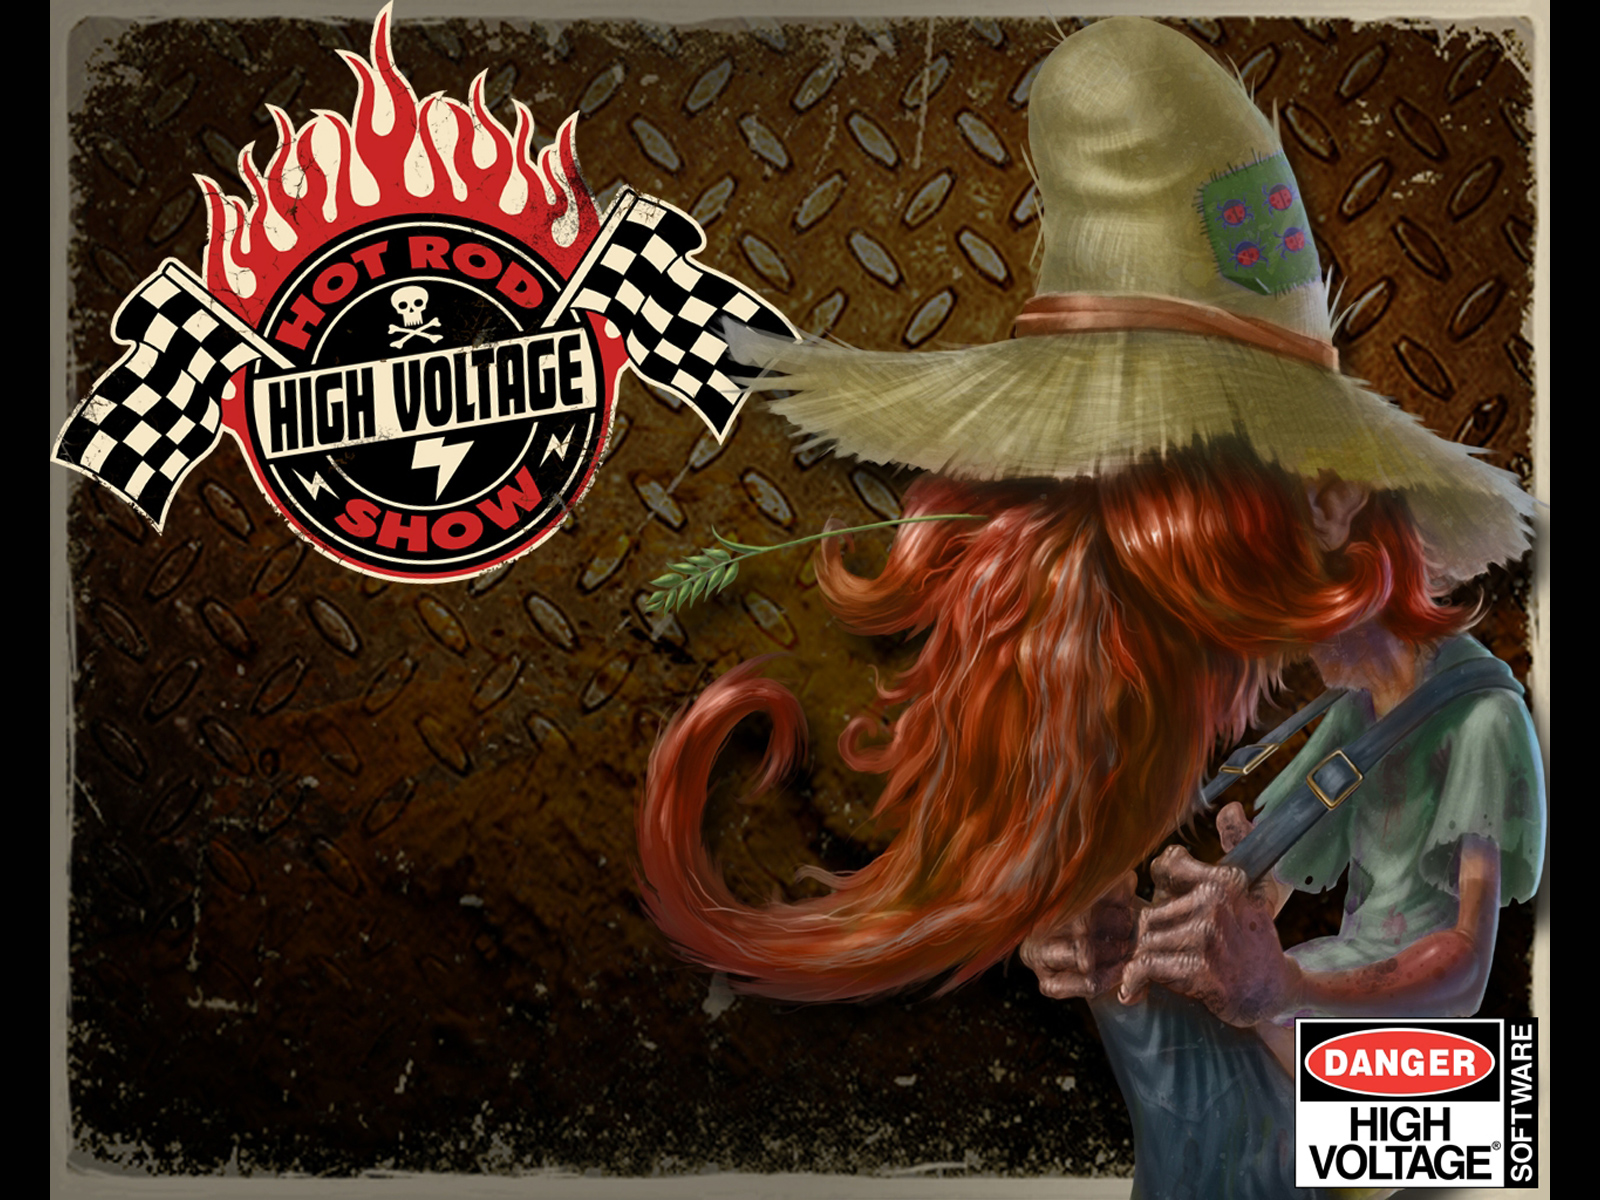 wallpaper redneck wallpaper redneck. redneck high voltage hot rod show wall...